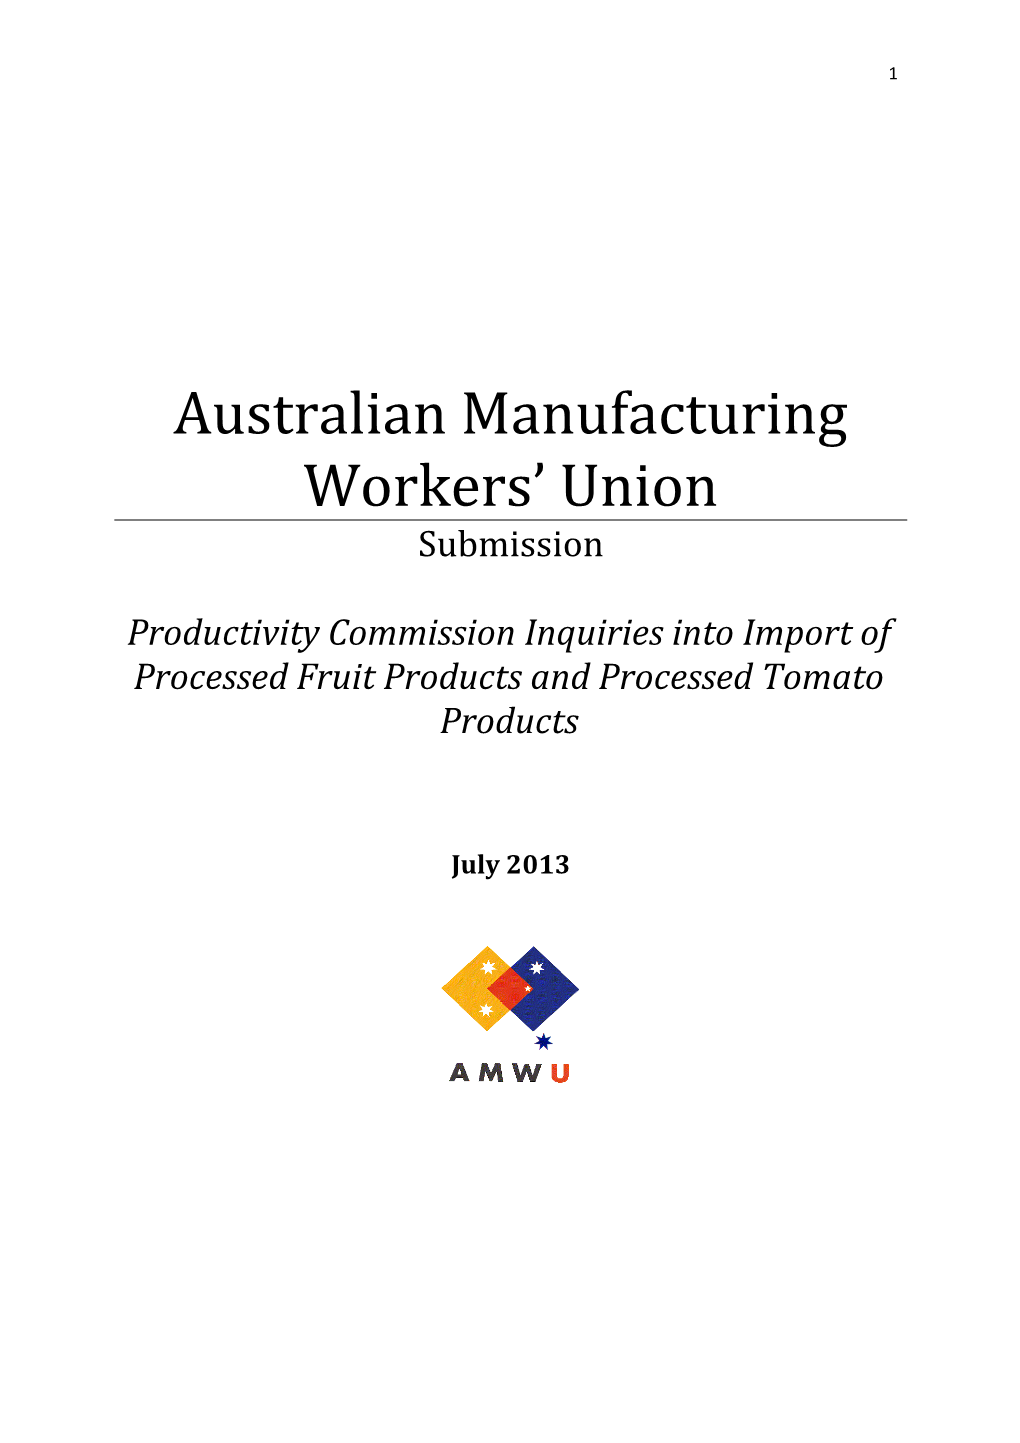 Submission 32 - Australian Manufacturing Workers' Union - Import of Processed Fruit Products